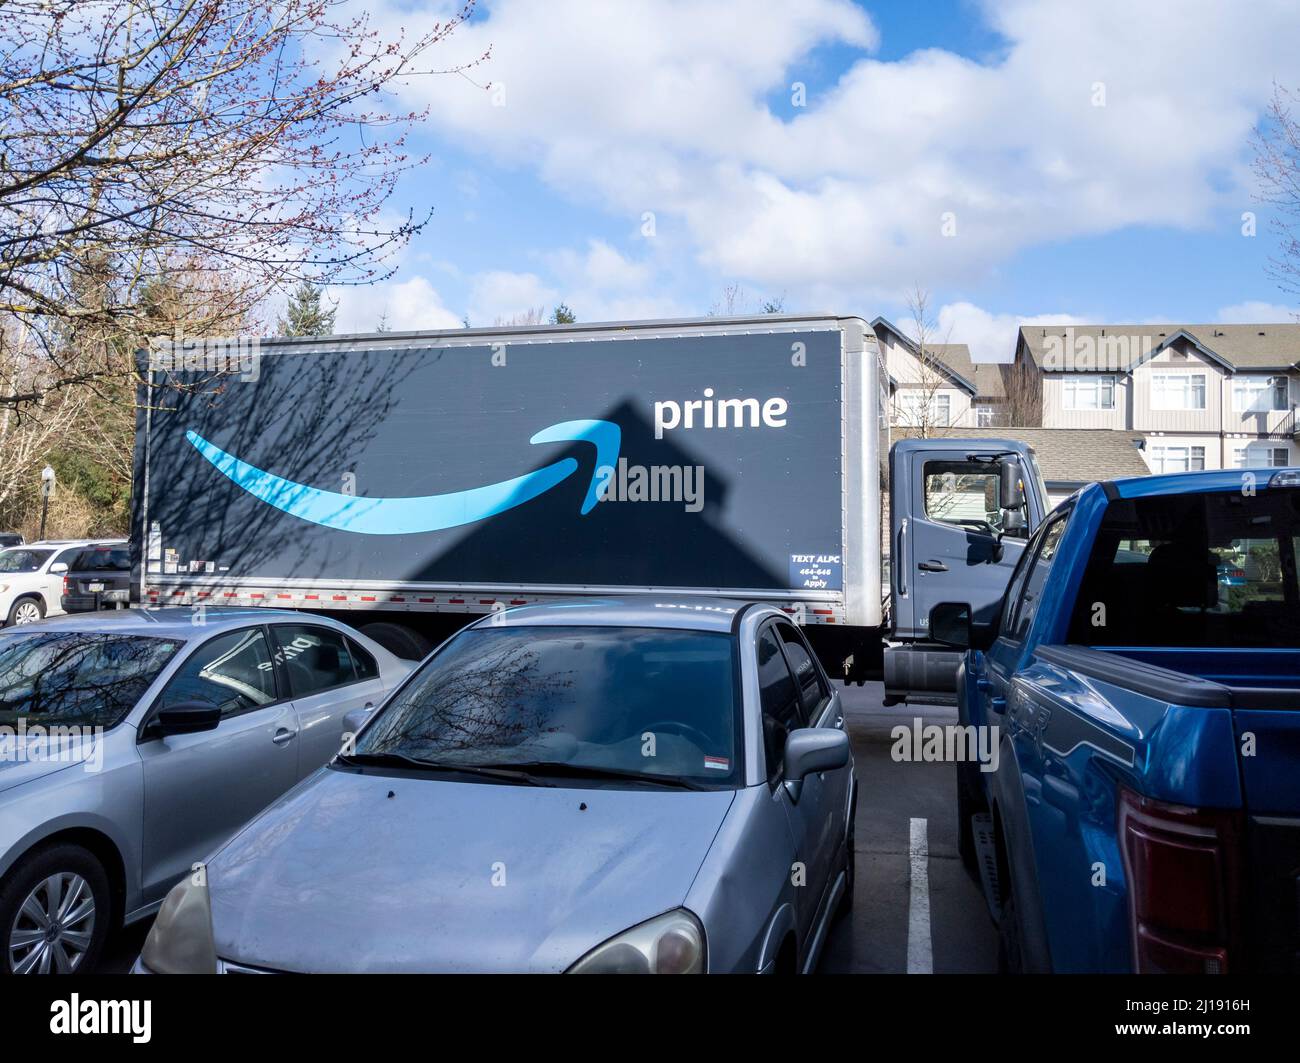 Seattle, WA USA - circa March 2022: Angled view of a large Amazon Prime semi-truck outside of an apartment complex on a bright, sunny day. Stock Photo